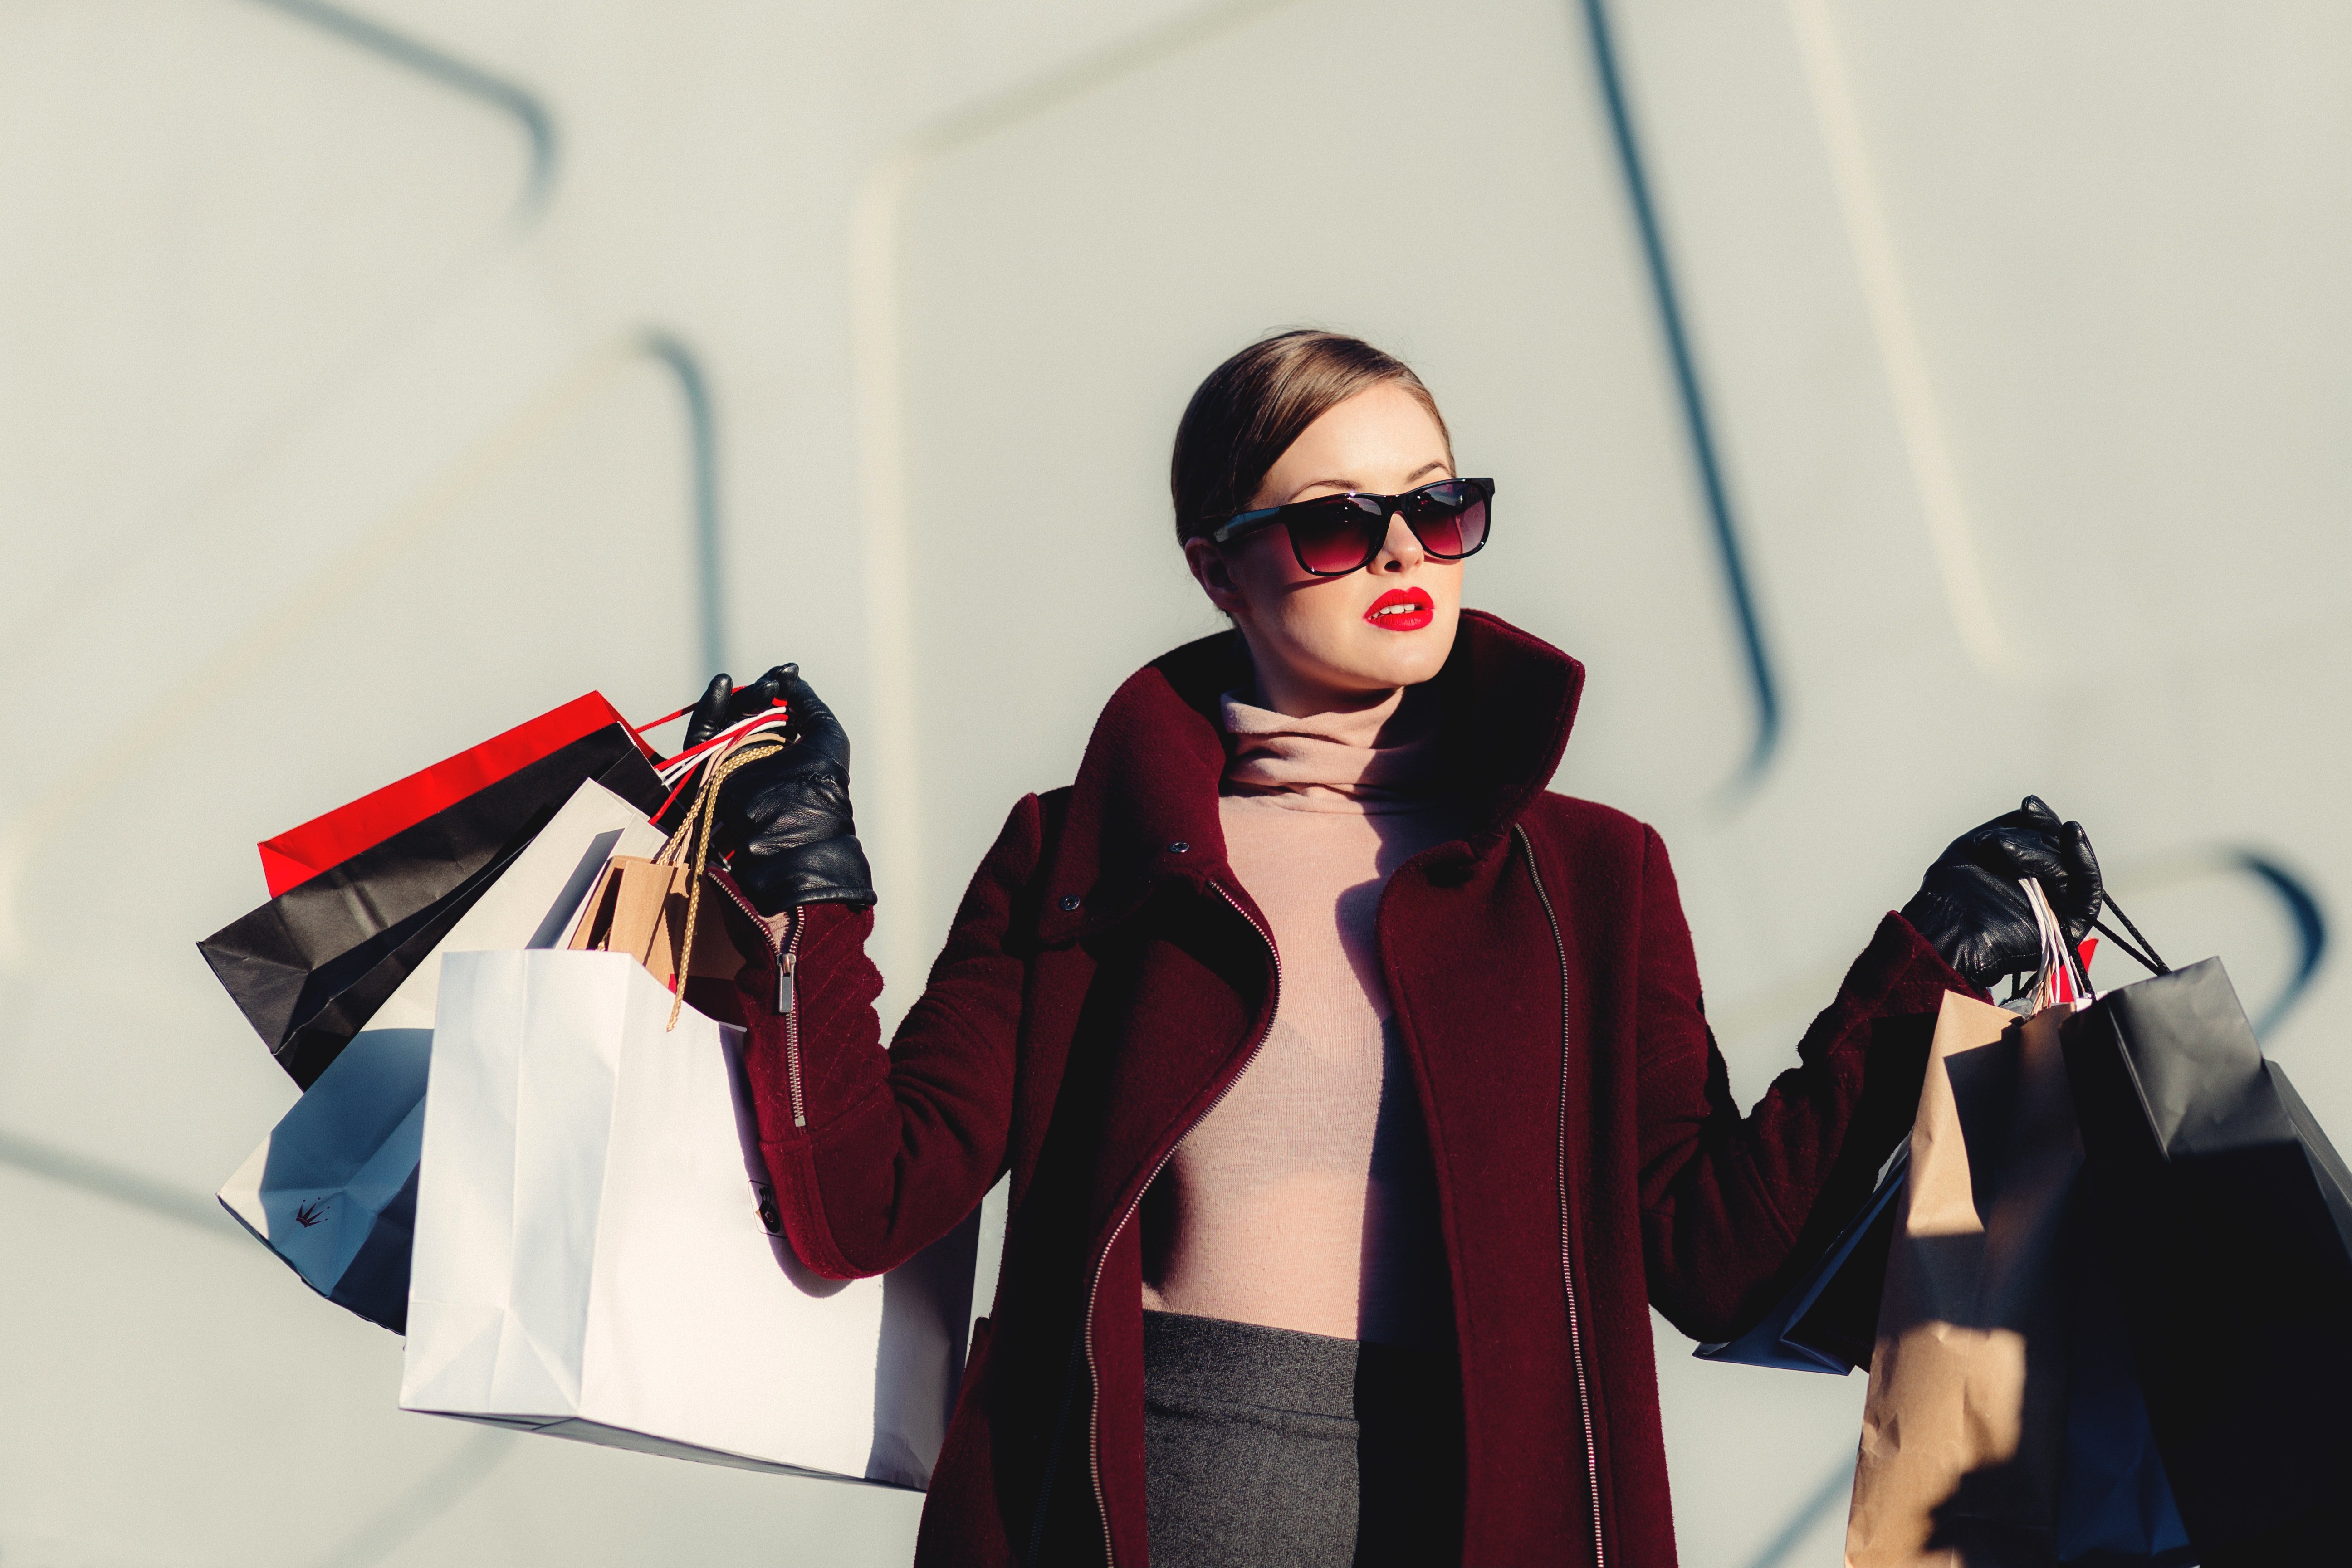 Pictured - A woman holding shopping bags | Source: Pexels 